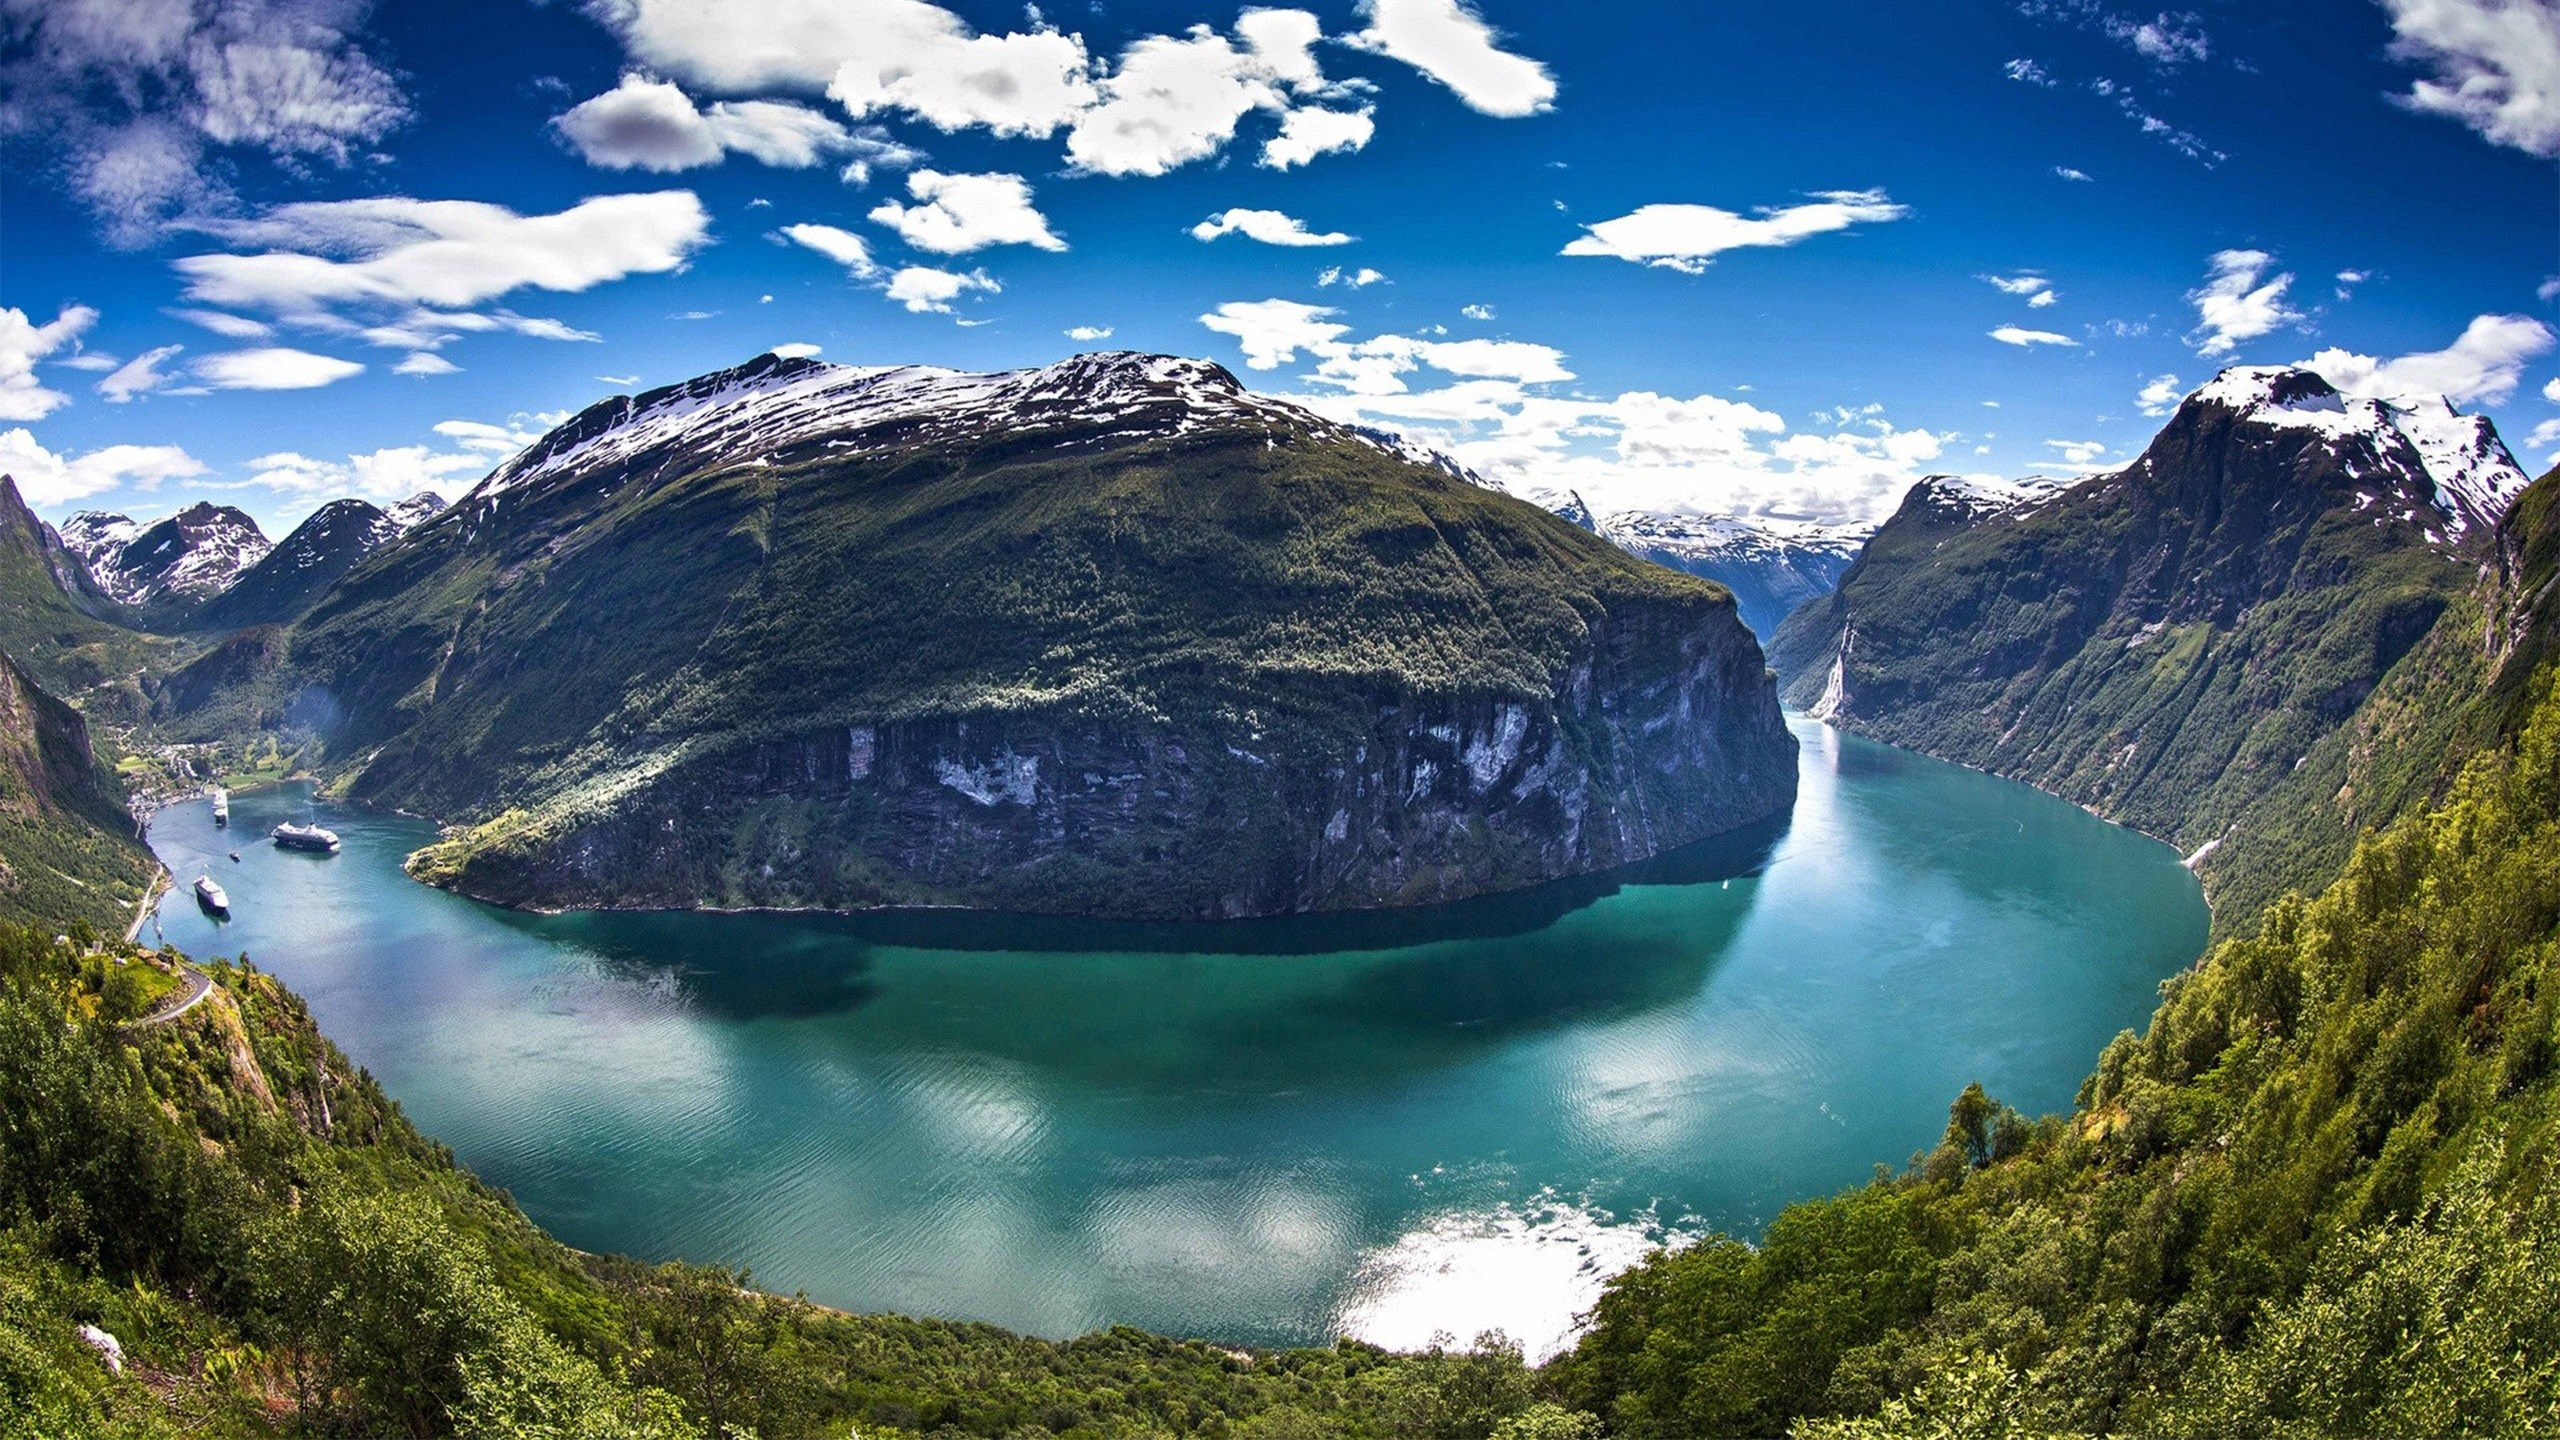 2560x1440 Geirangerfjord's Fjord In The Sunnmore Region Of The Romsdal Norway  District Desktop Wallpaper Hd  : Wallpapers13.com